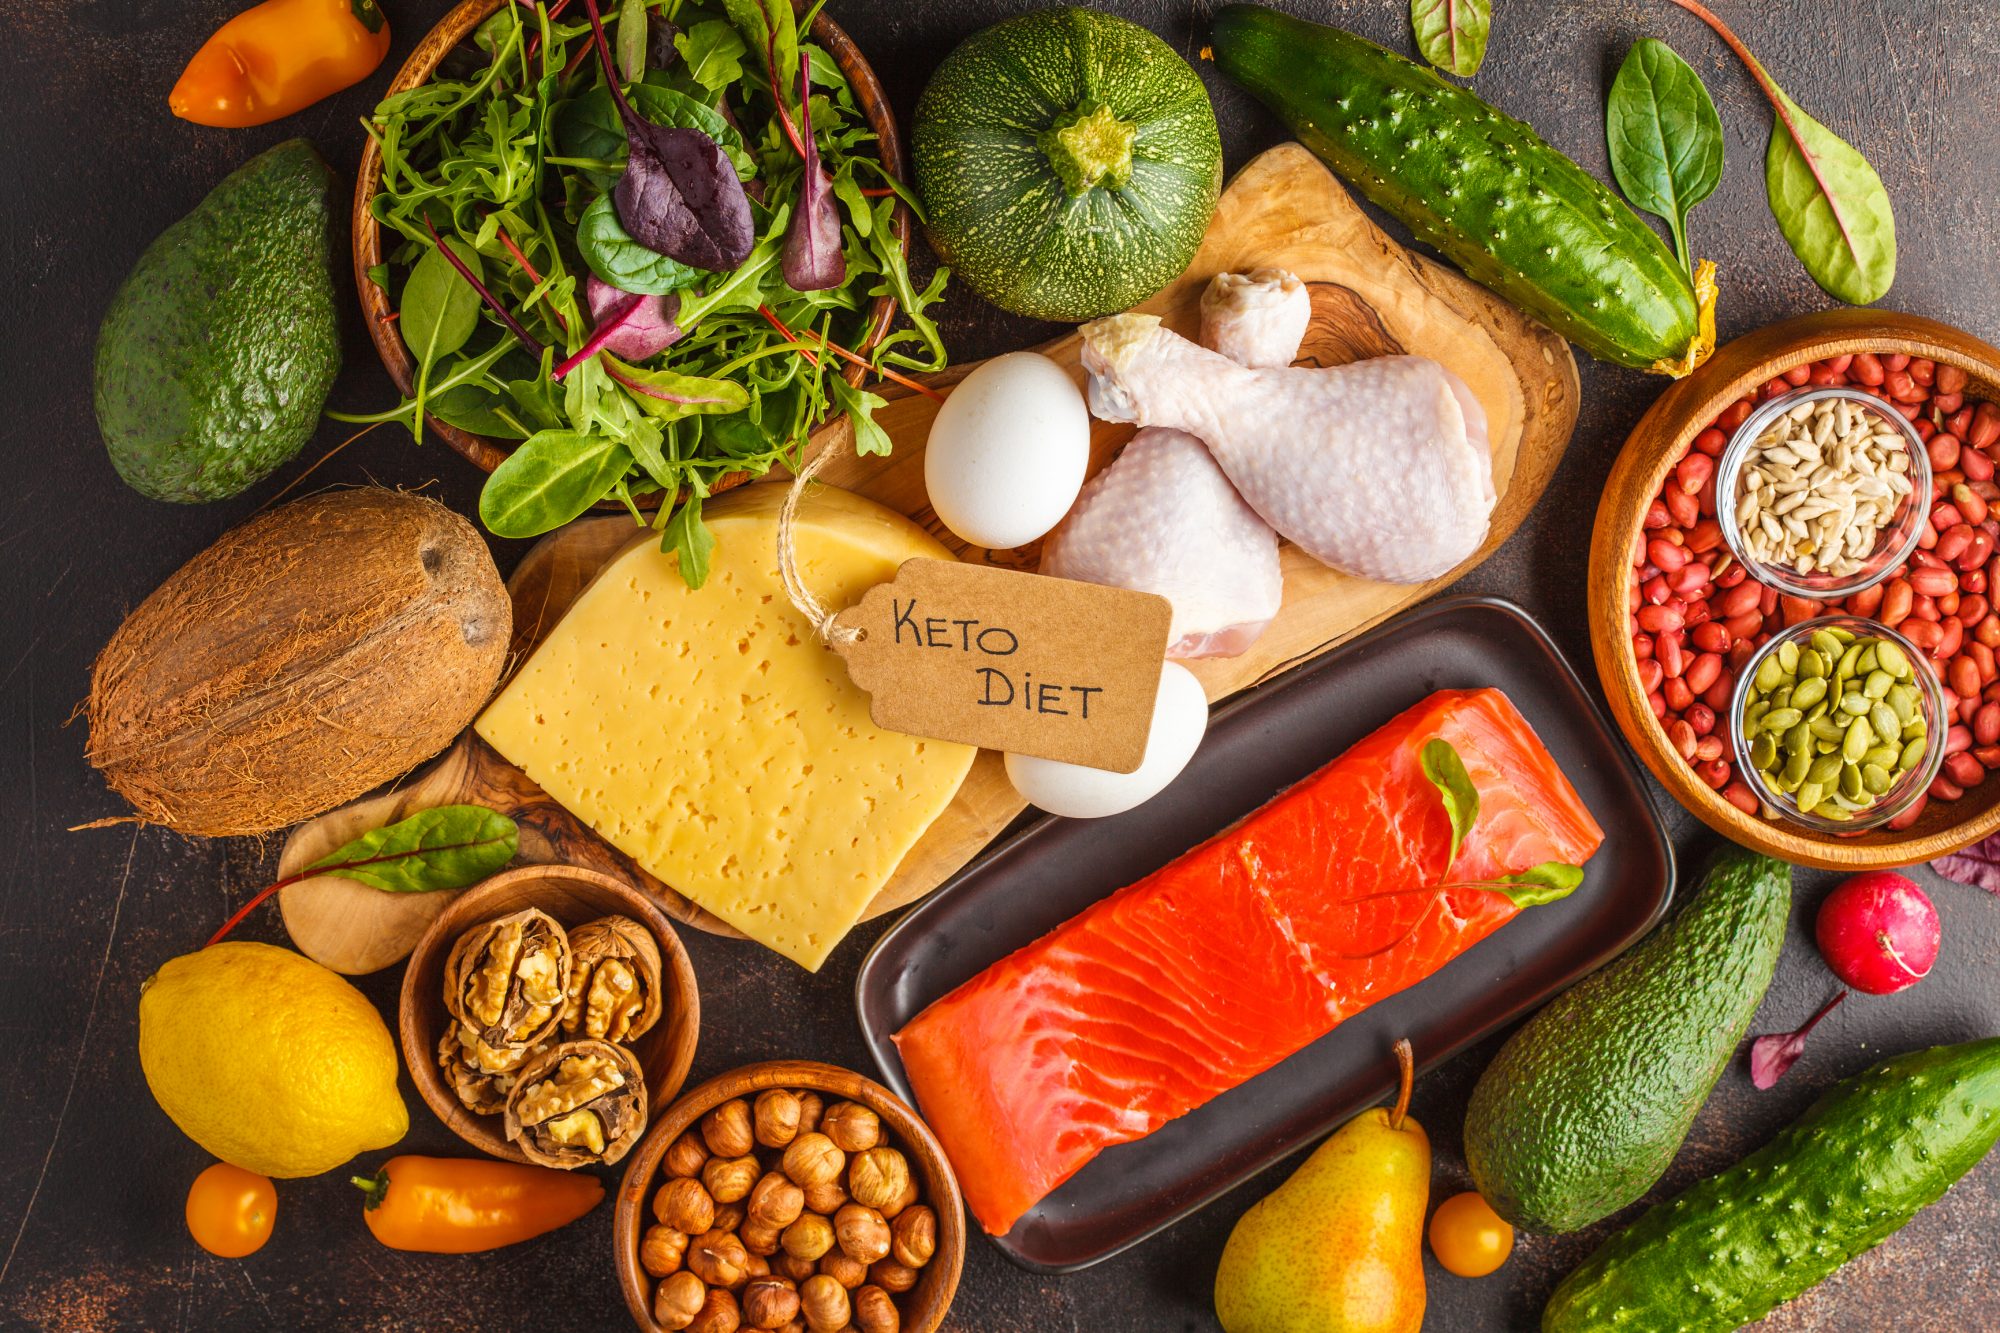 Keto diet risk to pregnant women and kidney disease patients